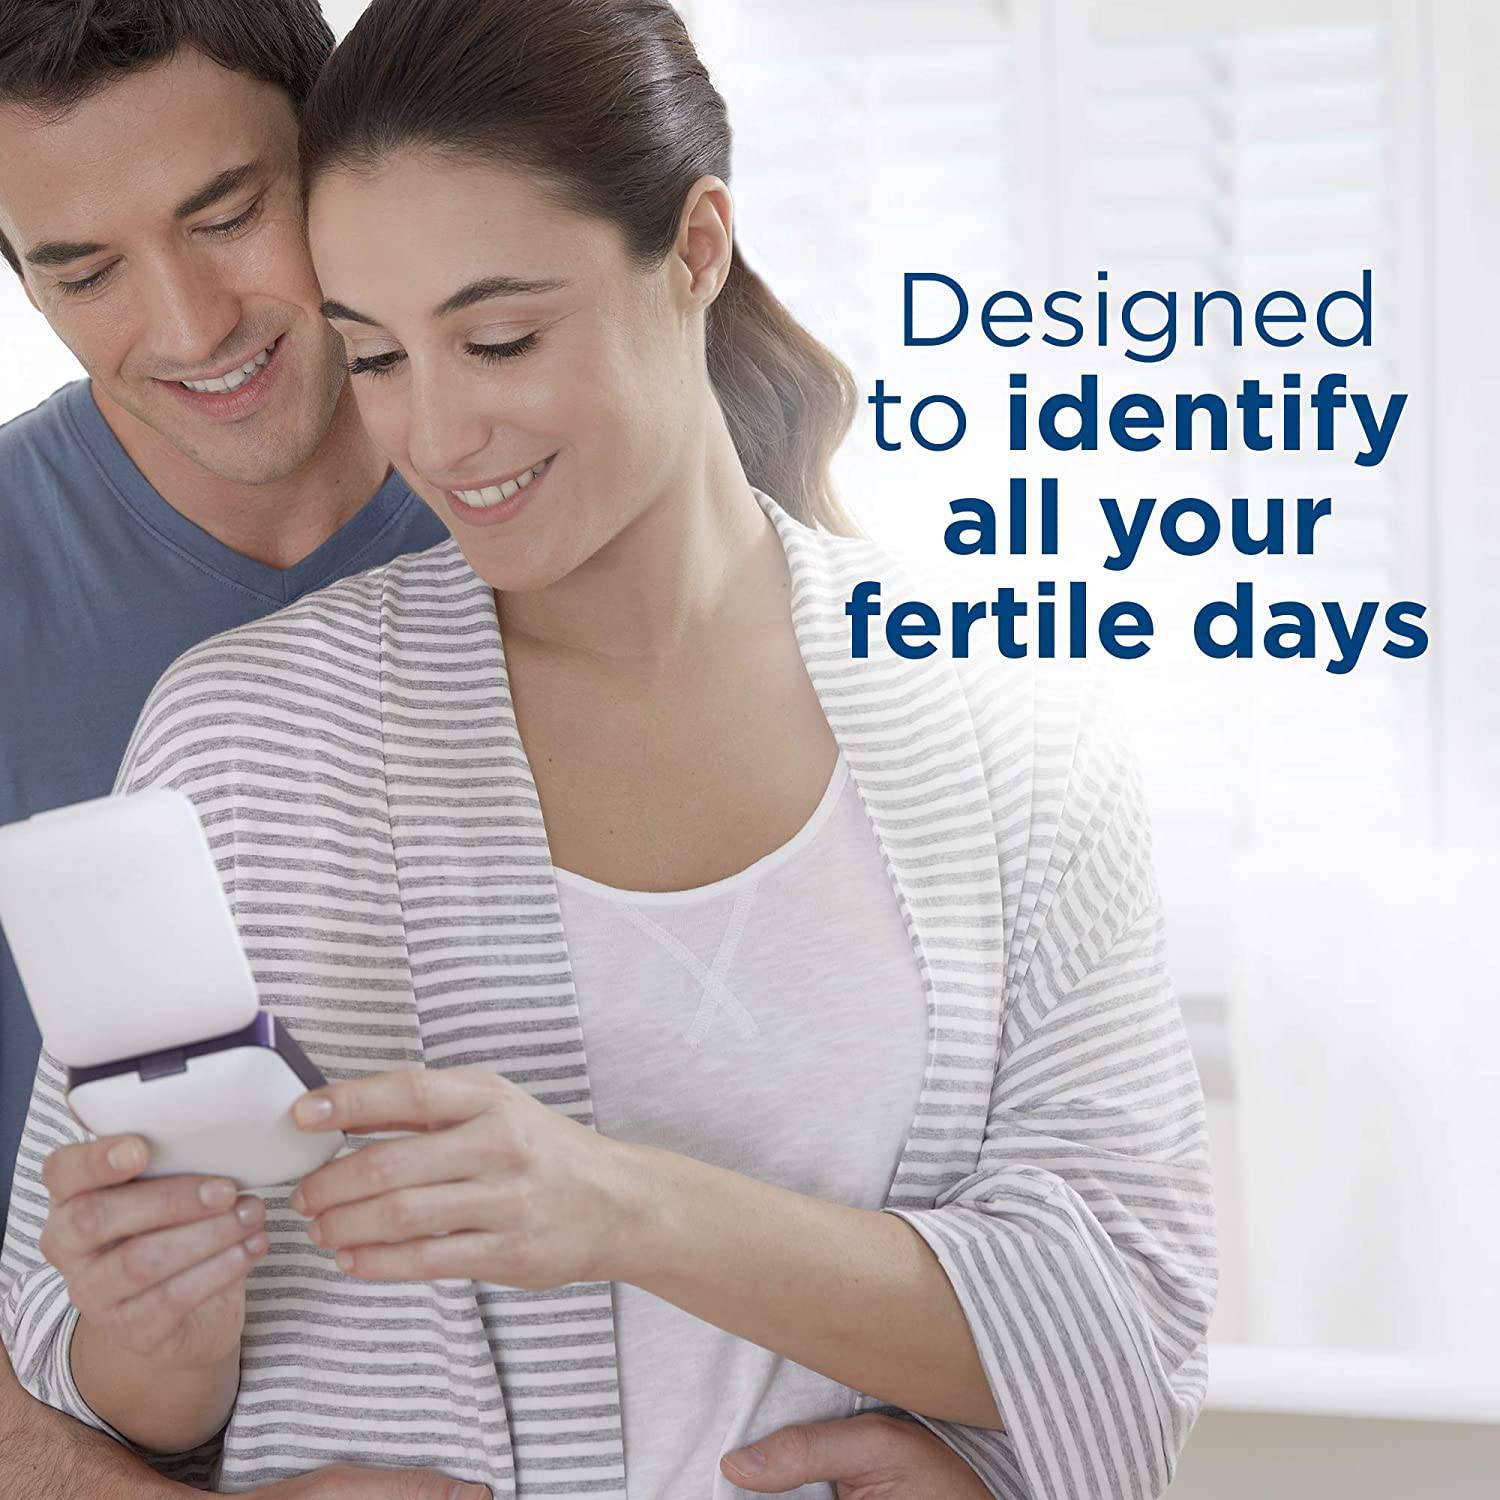 Clearblue Advanced Fertility Monitor - Easy Use Touch Screen, Fertility Detector - Healthxpress.ie